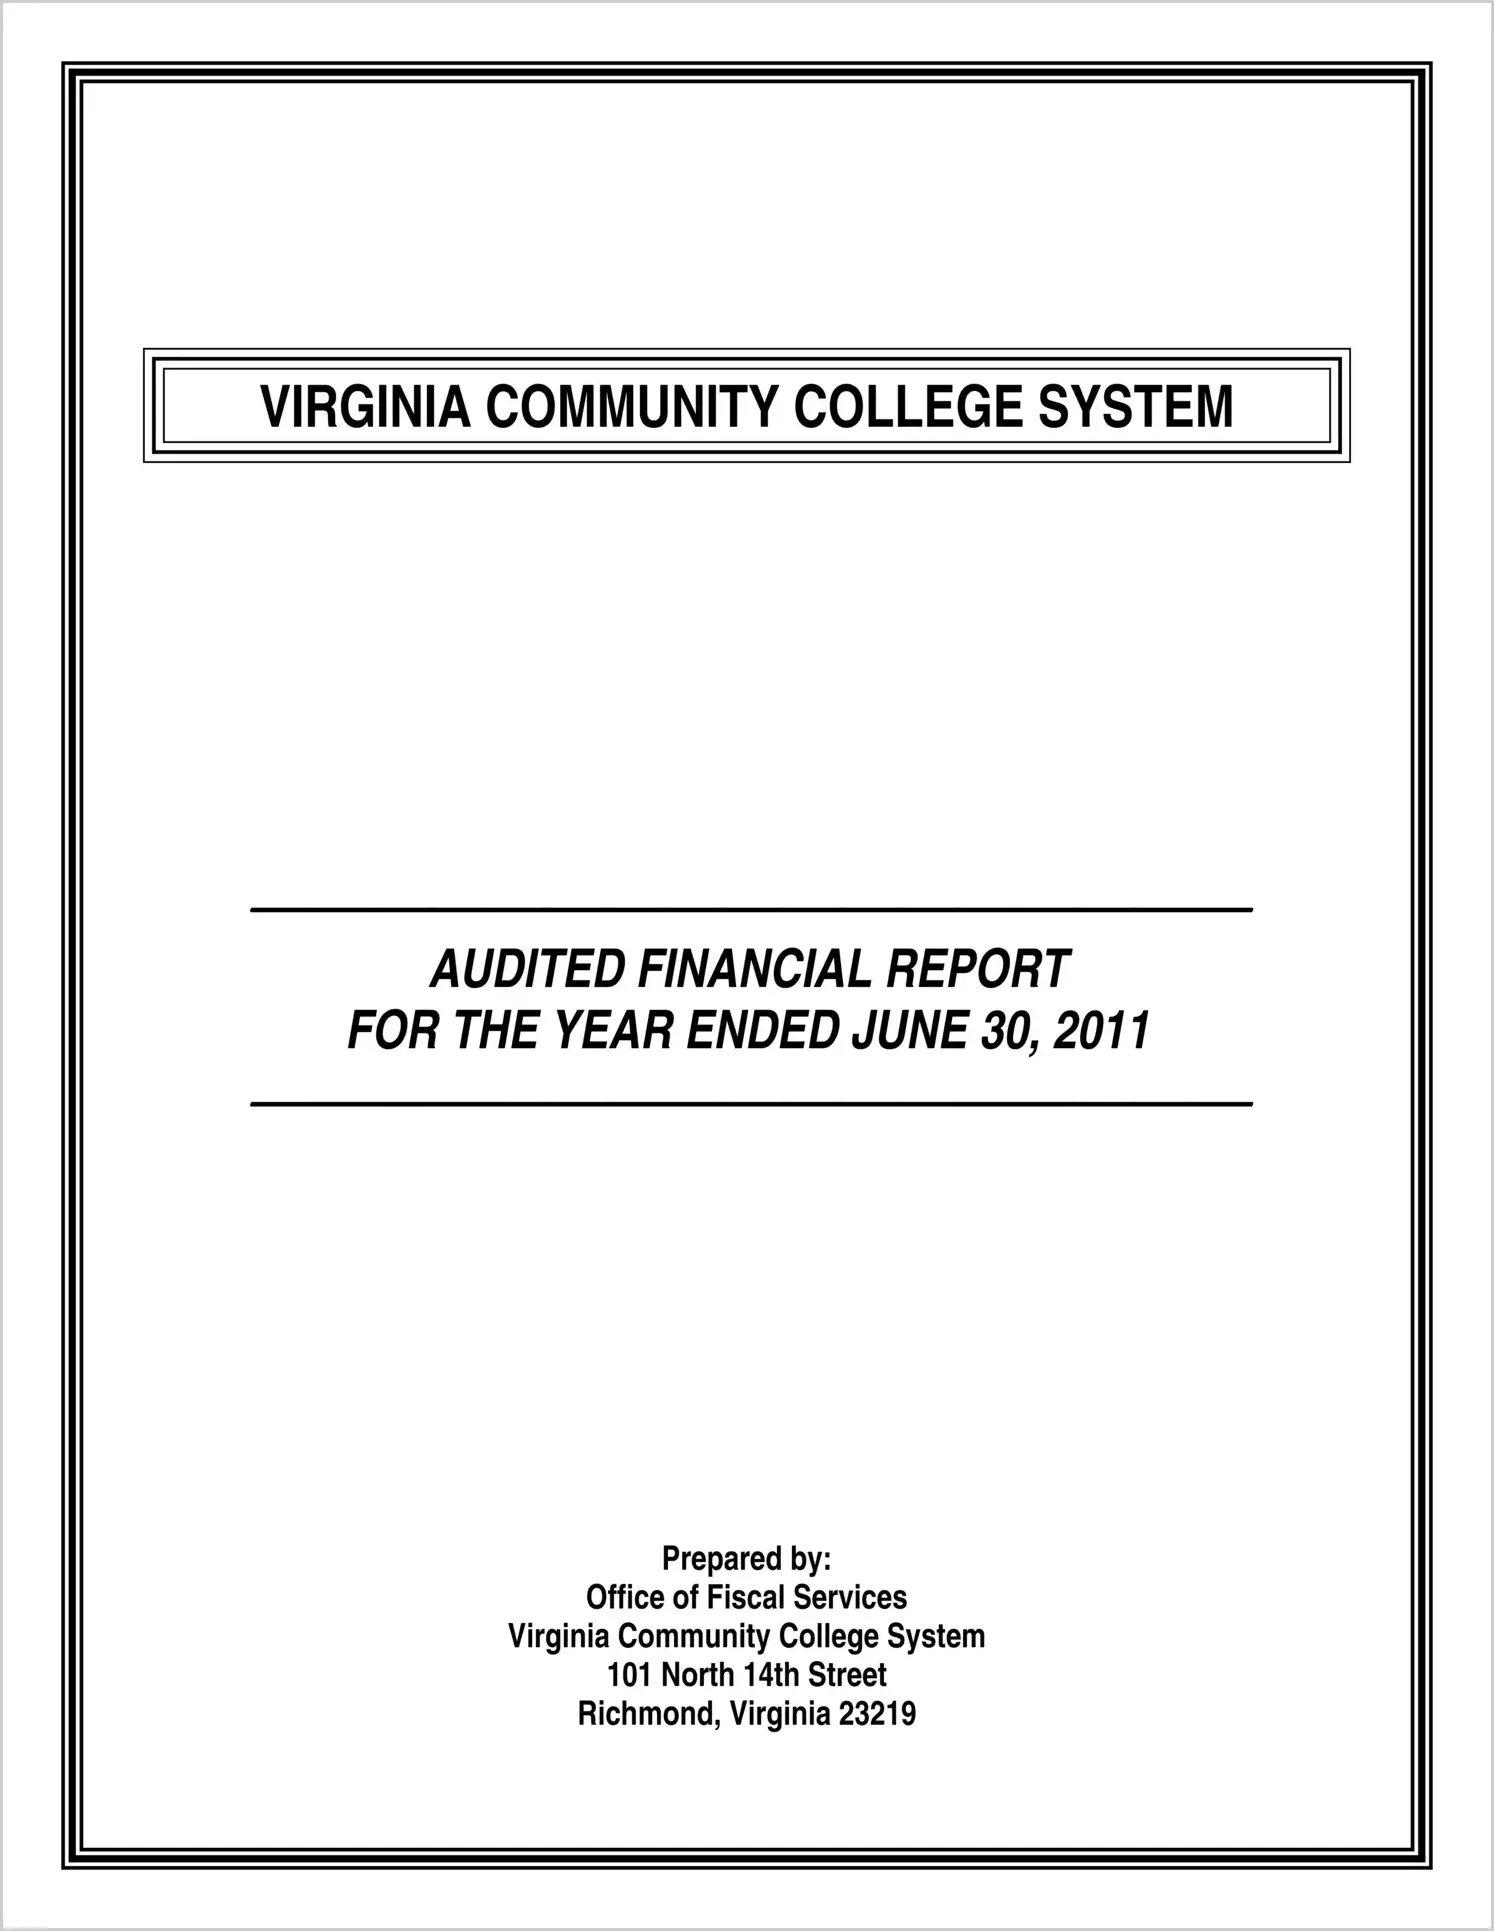 Virginia Community College System Financial Statements for the year ended June 30, 2011